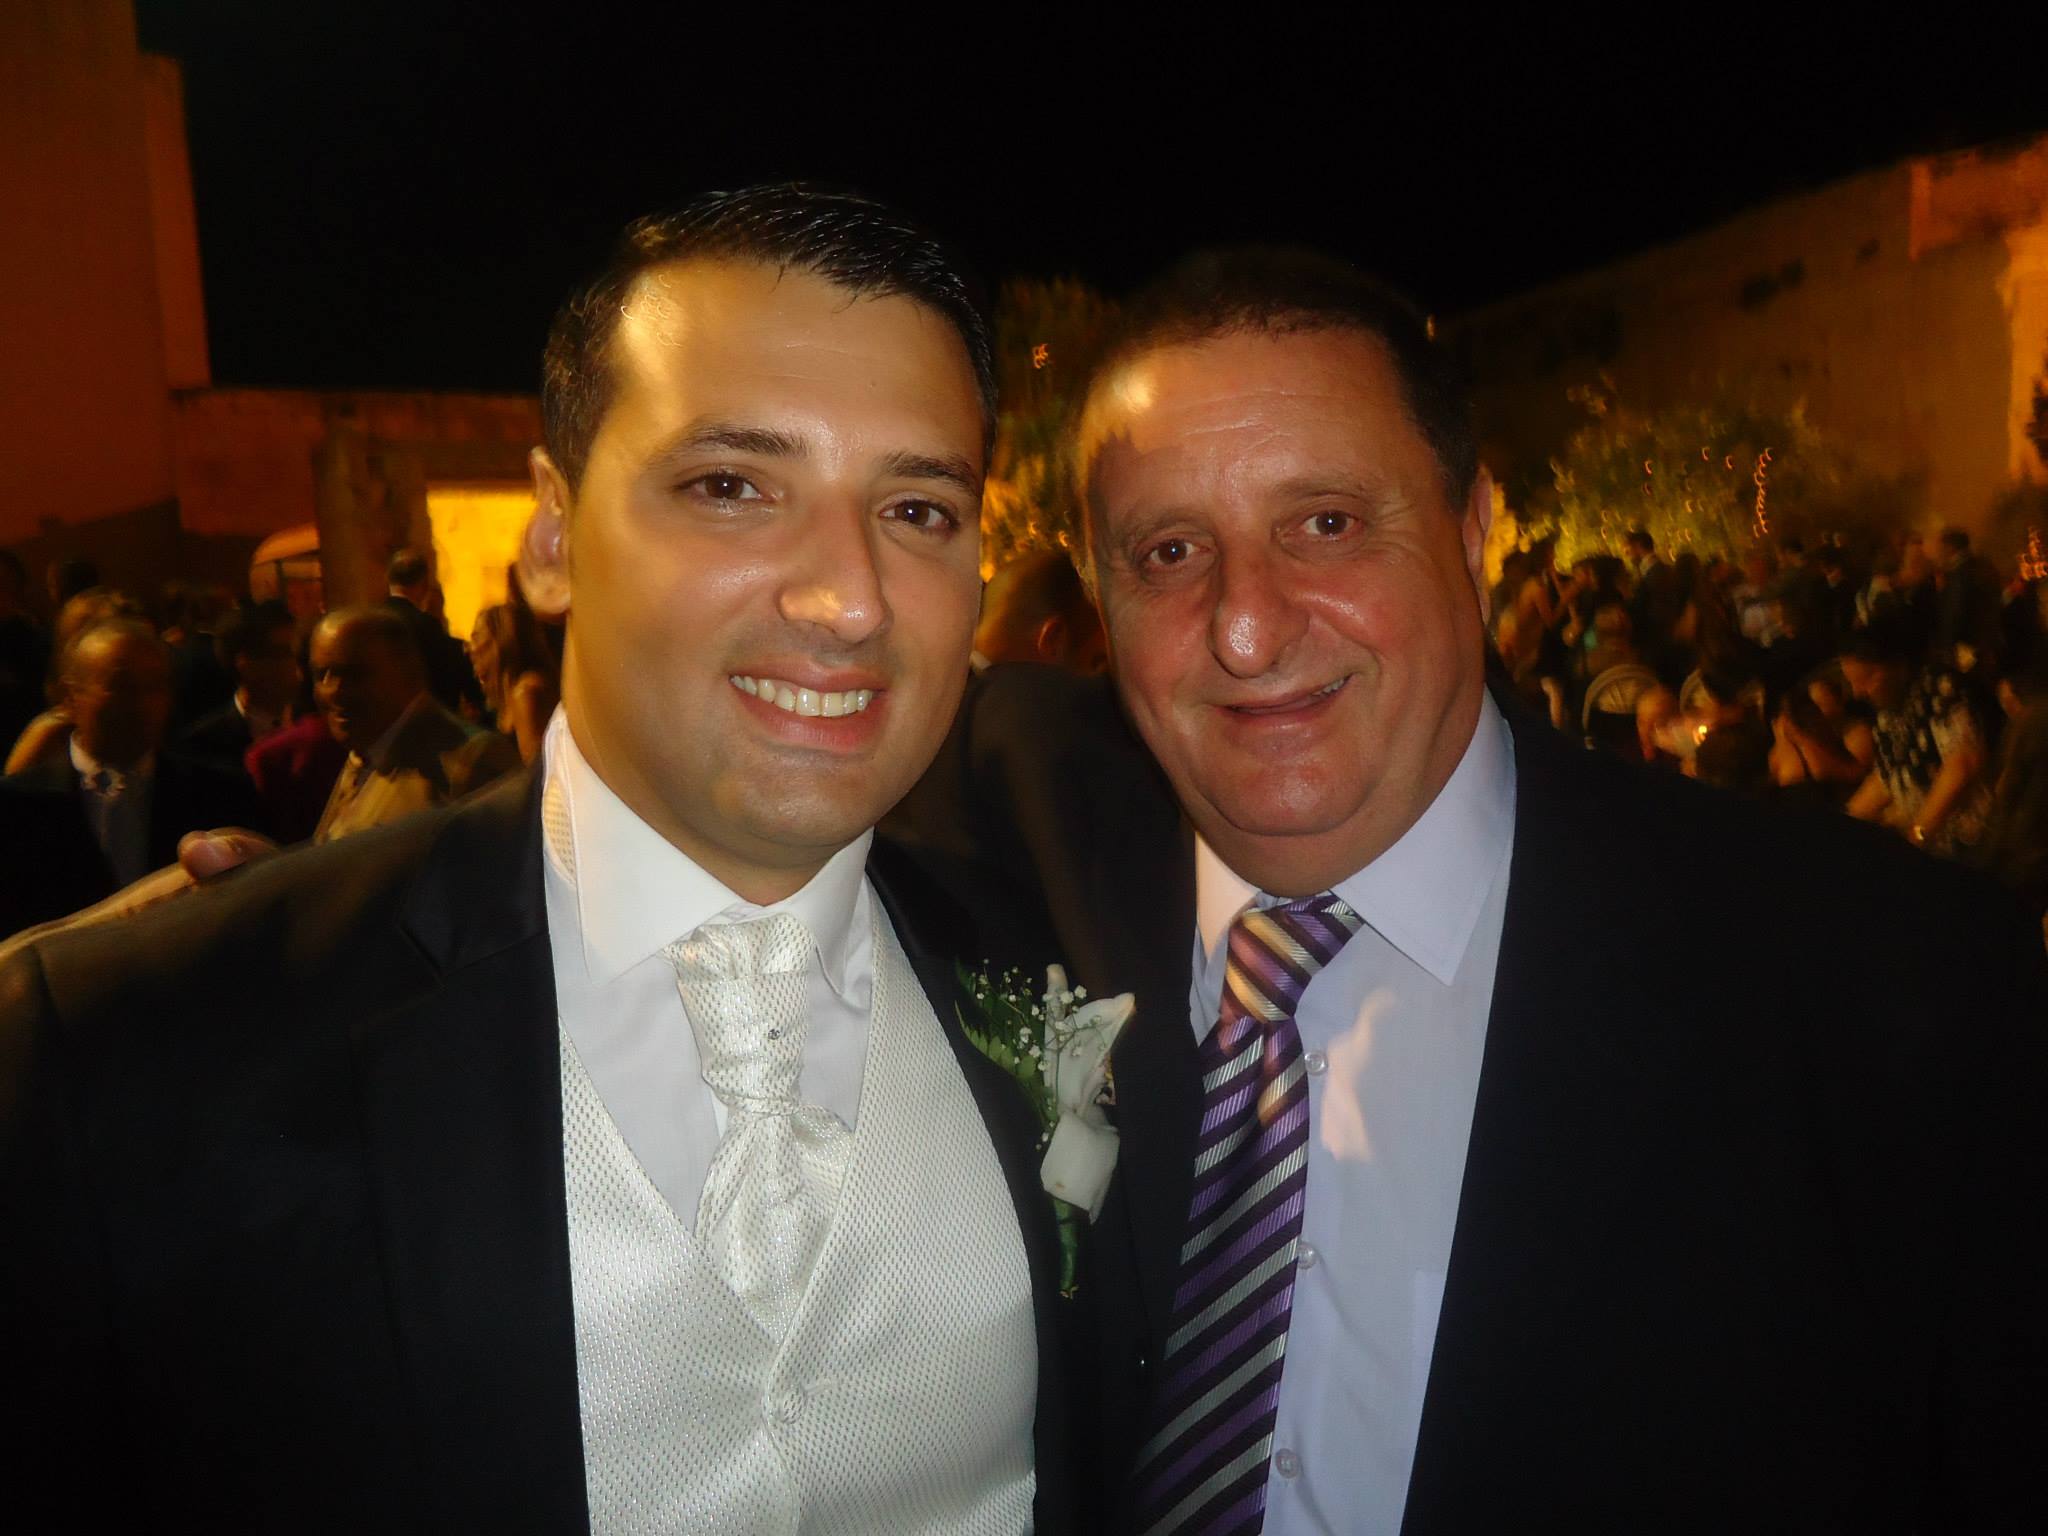 This is Labour Party donor Silvio Debono, who has been given a massive tract of land at St George's Bay, where the Insitute of Tourism Studies now is, and where is already selling flats in two towers on deposit. He is seen here at the marriage of Economy Minister Chris Cardona's aide, former Labour Party television reporter Jonathan Attard.